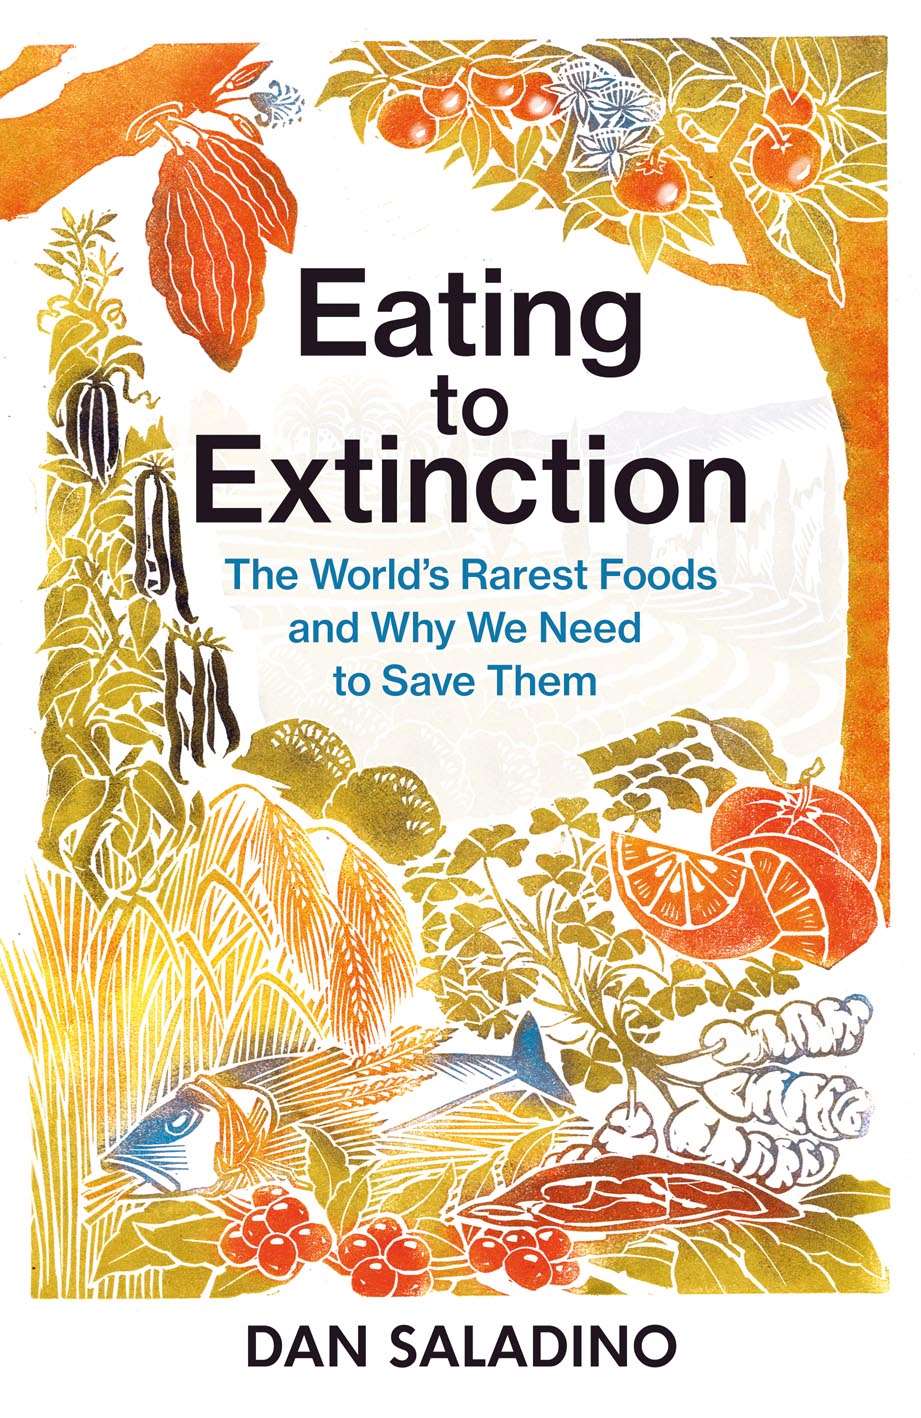 Clare Melinsky, Clare Melinsky Lino cut book cover illustration for Eating to Extinction by Dan Saladino, published by Penguin Books. Intricate detailed botanical and recipe elements, surrounding a brown type. 